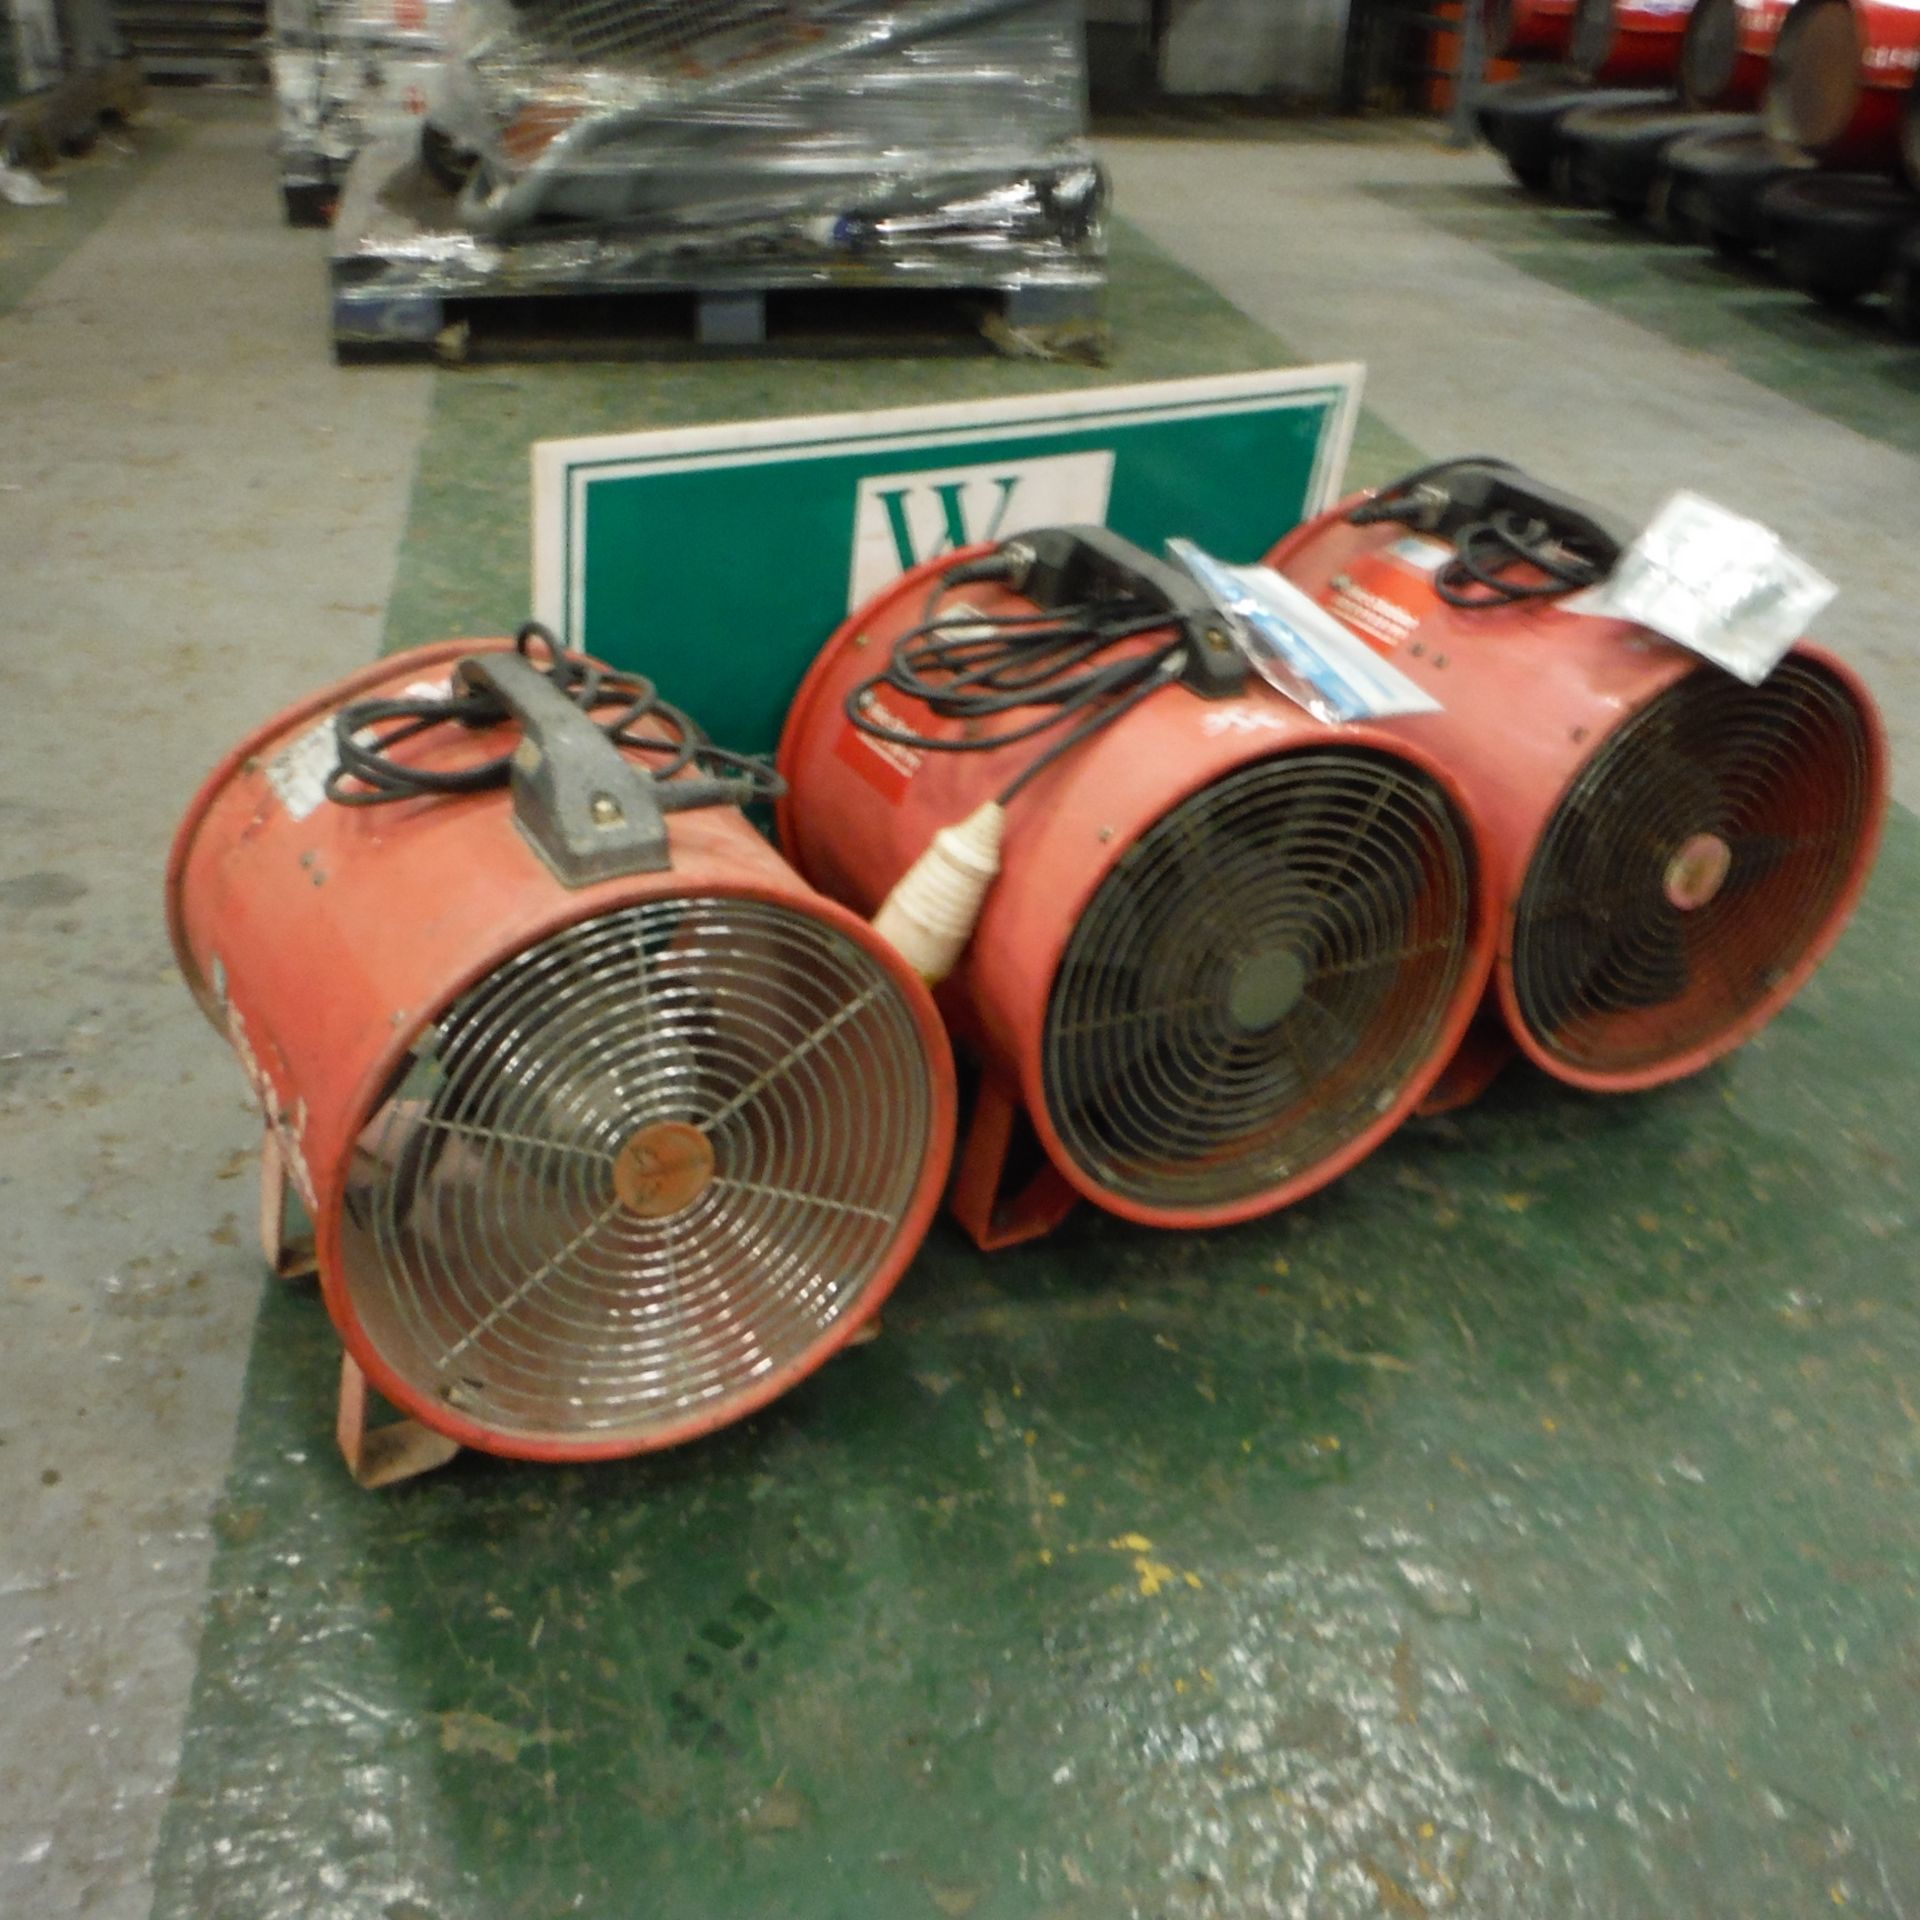 3 x ELITE 300 air mover/fume extractor